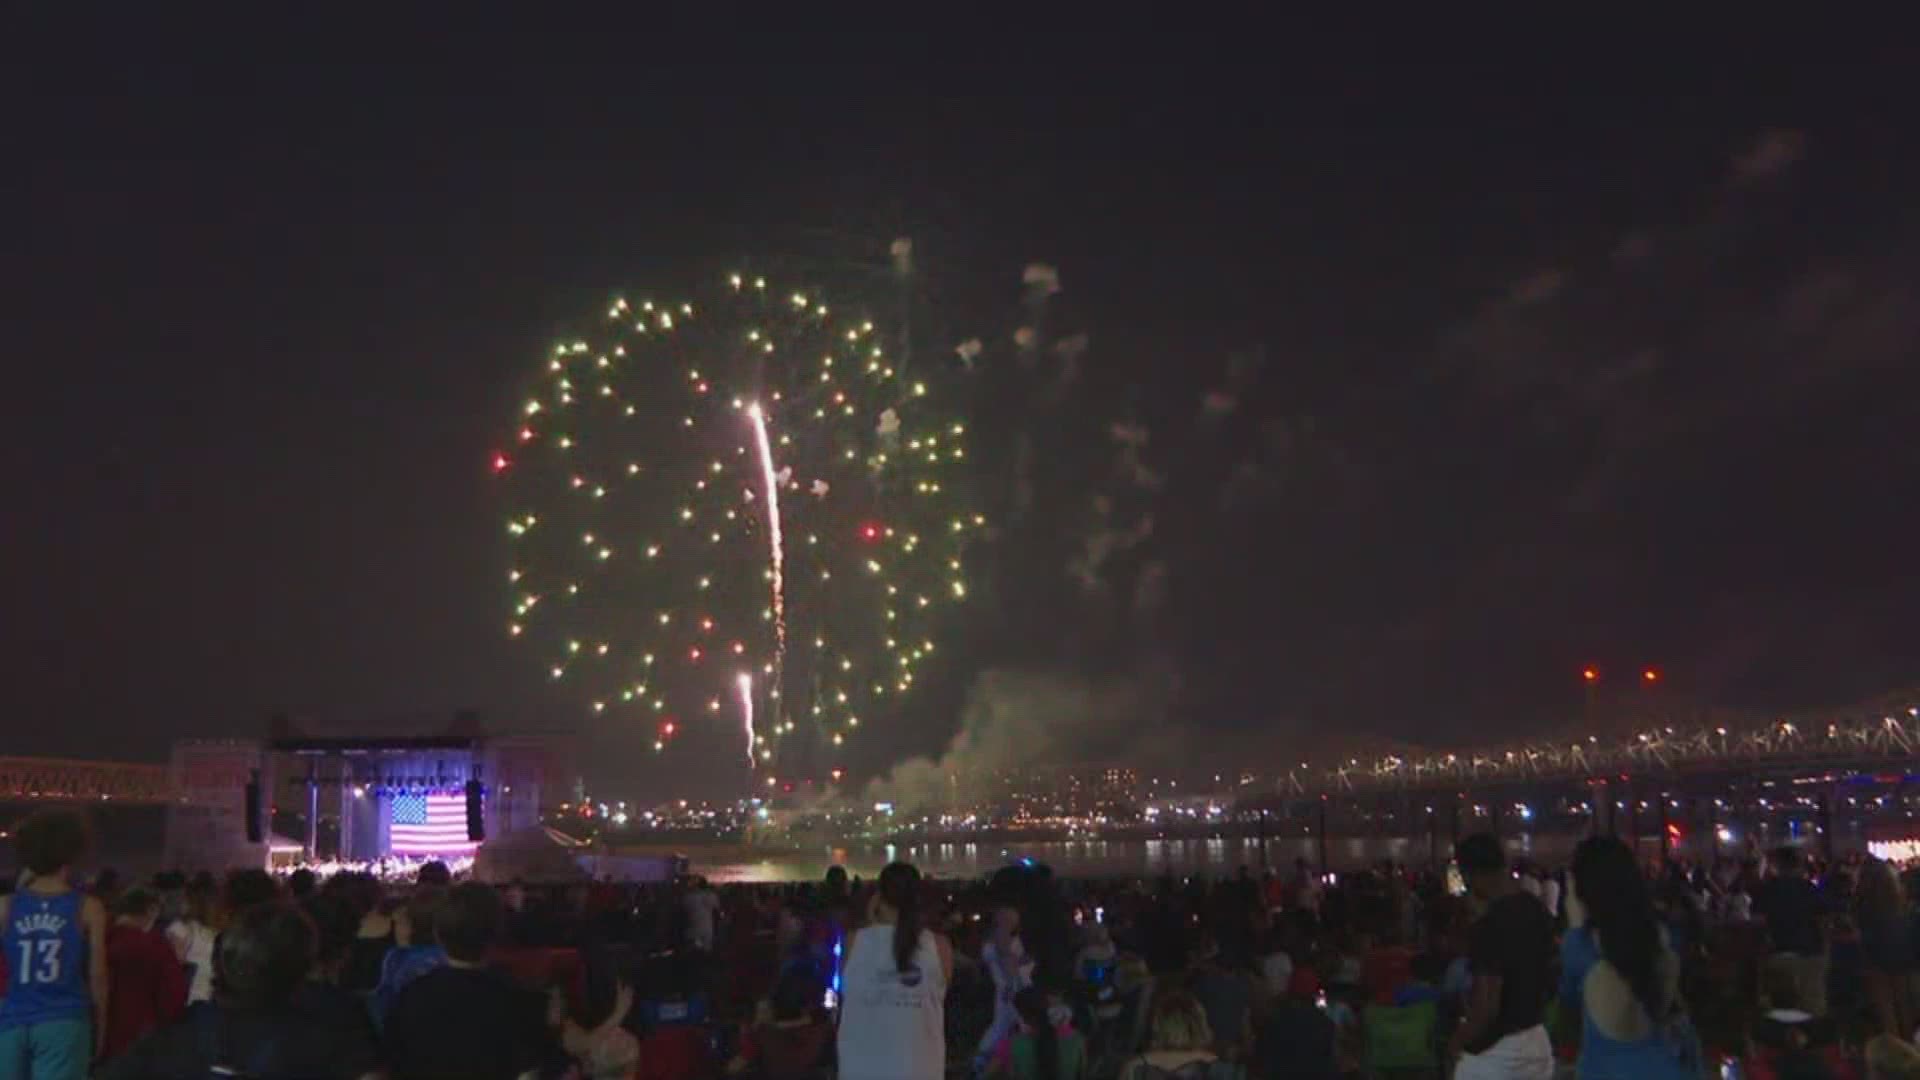 The city of Louisville had plenty of red, white and boom to celebrate Independence Day, one year after the COVID-19 pandemic canceled plans.